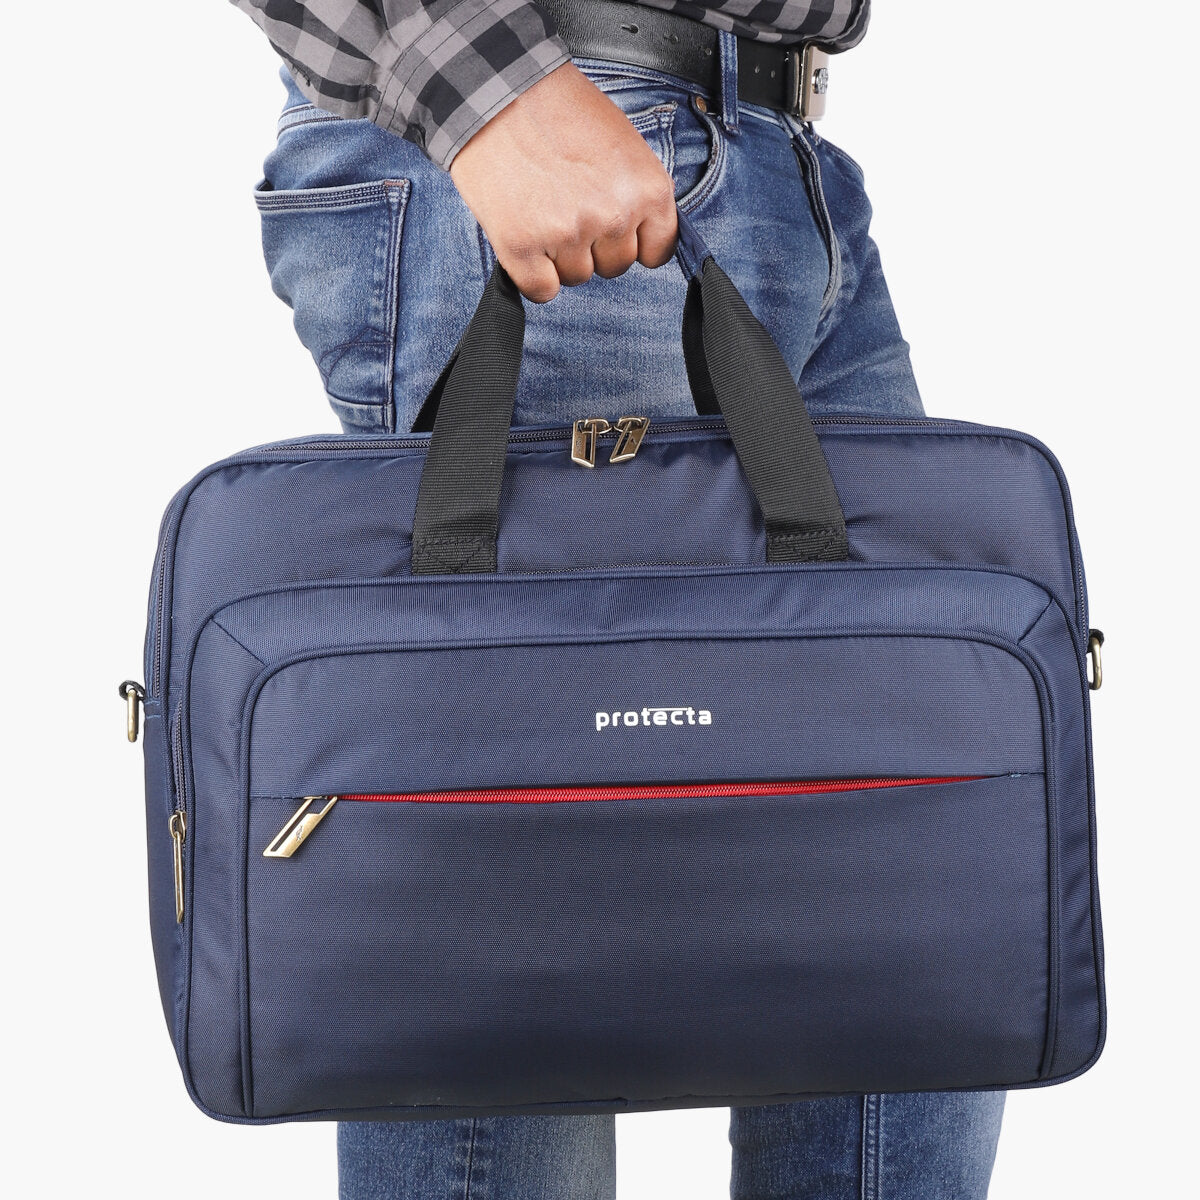 Navy-Red, Protecta Staunch Ally Travel & Offfice Laptop Bag-8